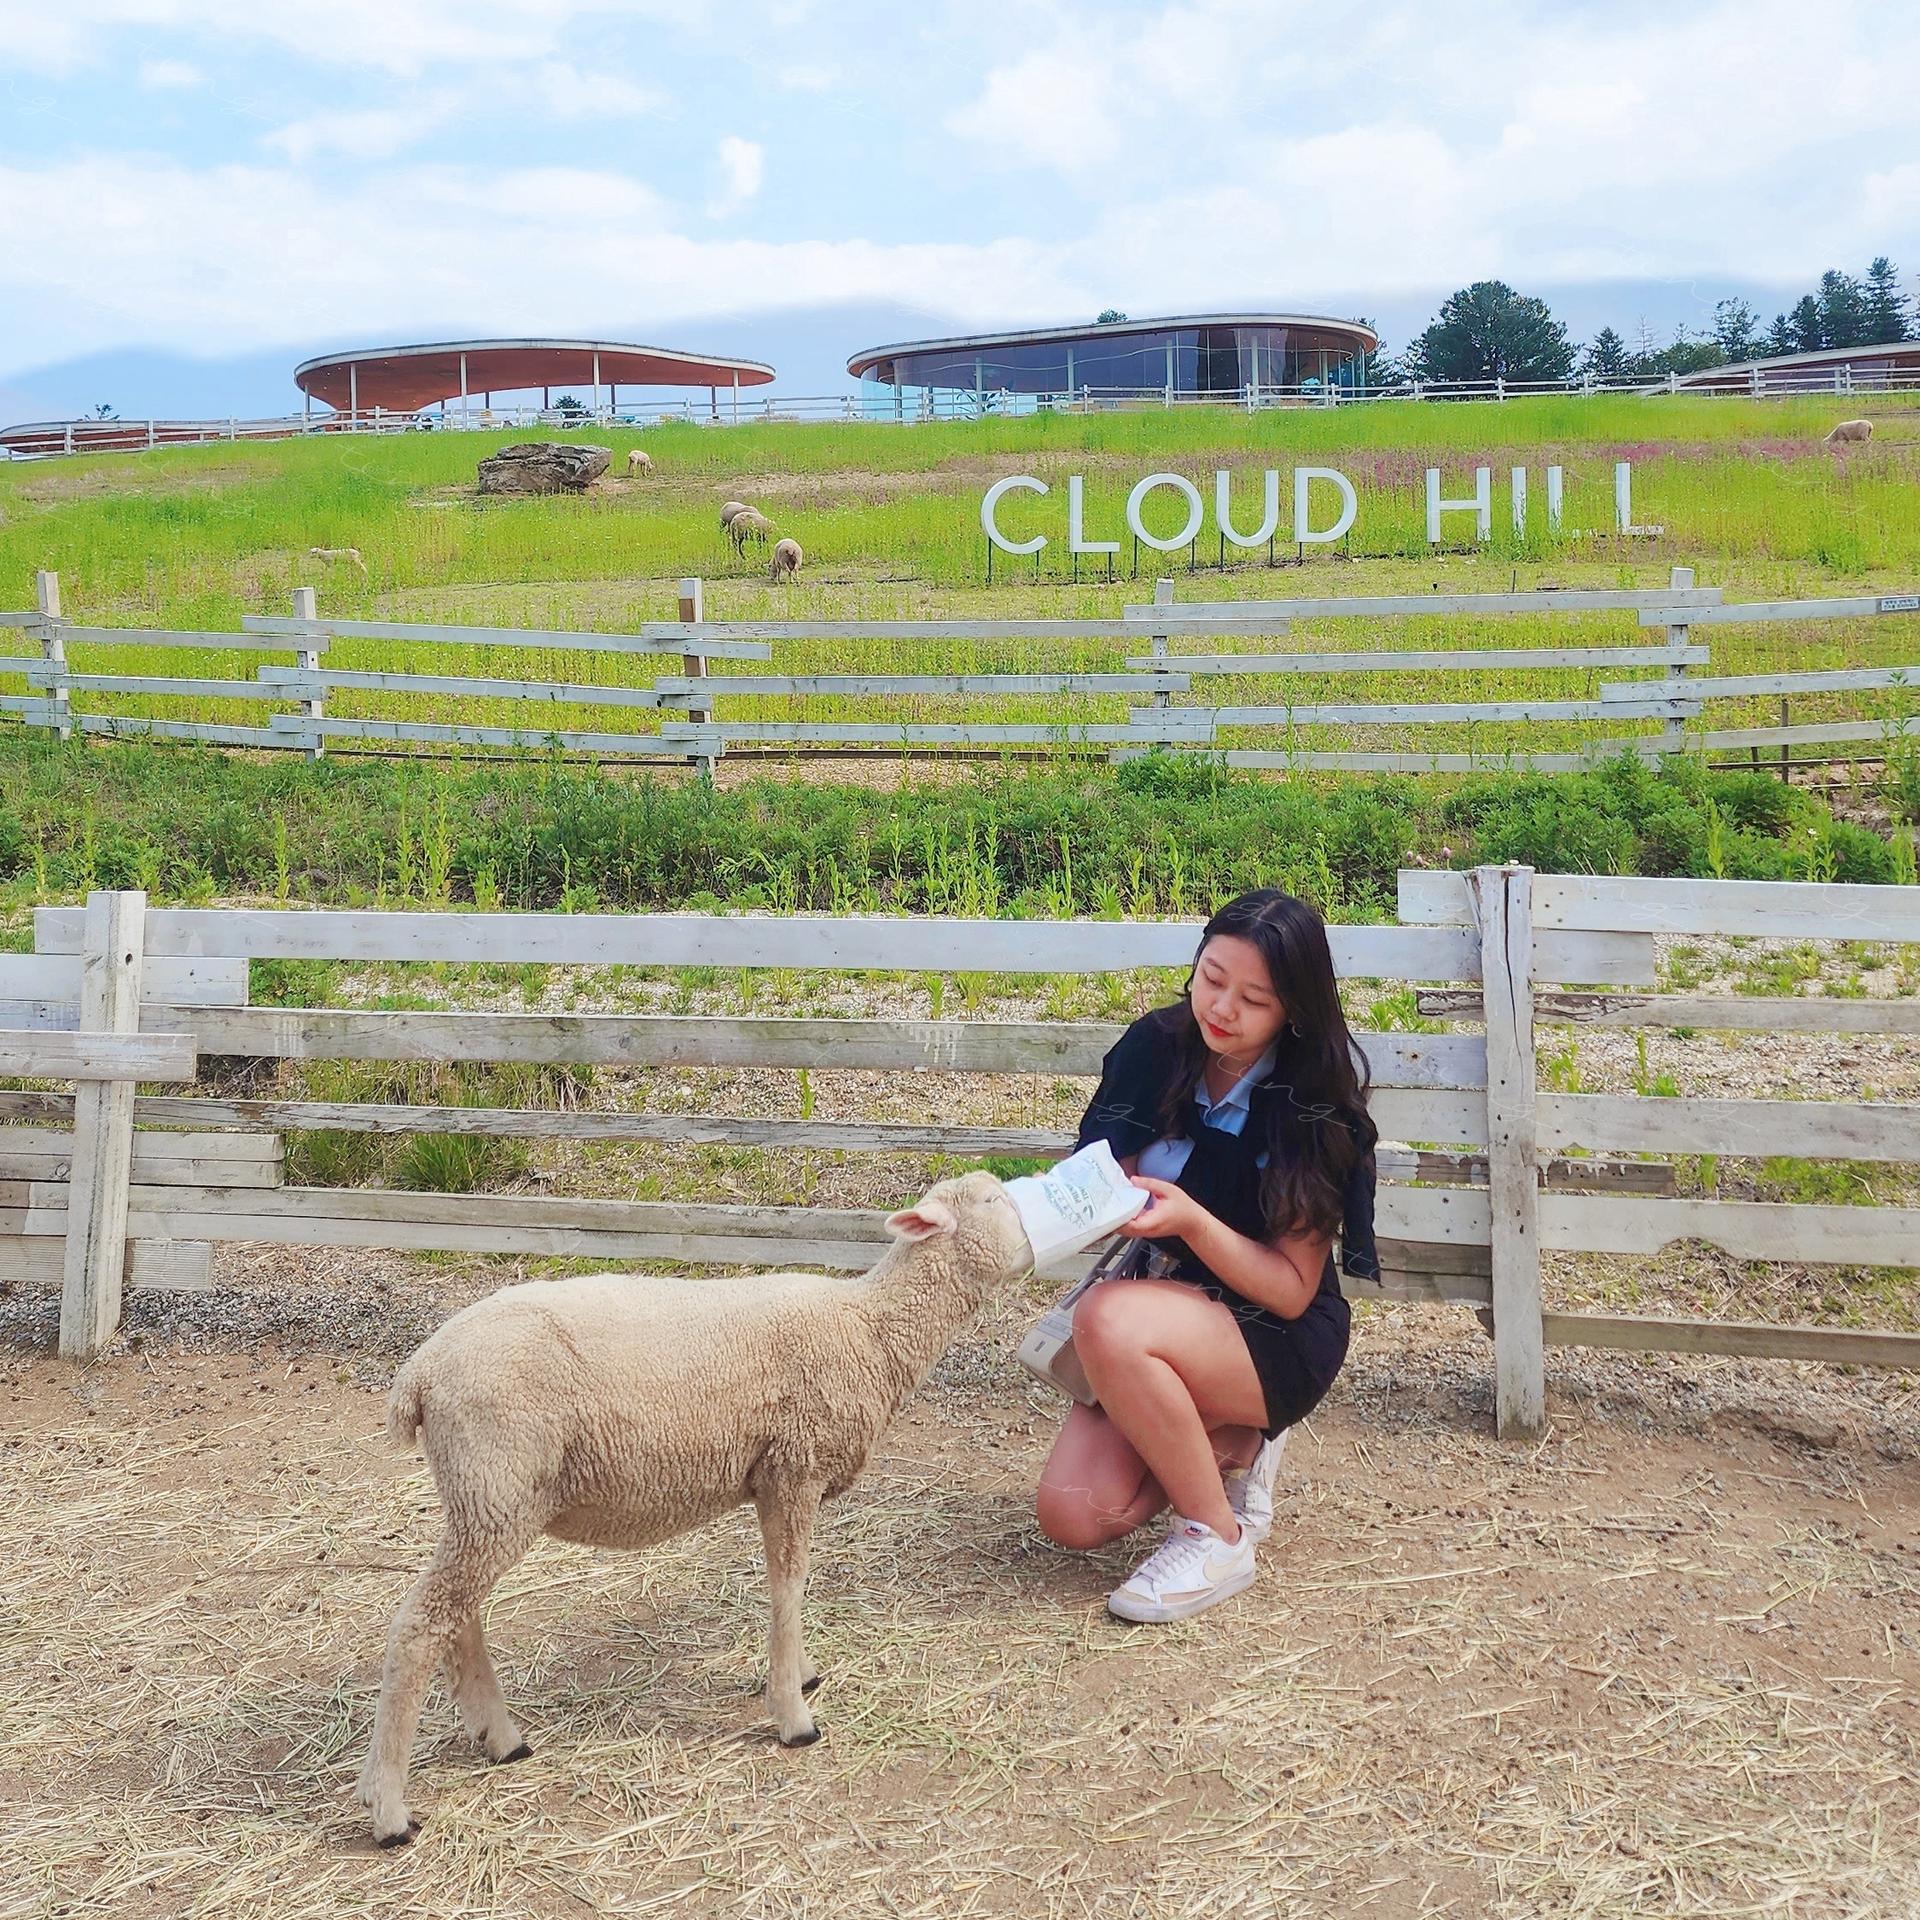 Recommendation for tourist spots: '가평' Sheep Farm and Cloud Hill.